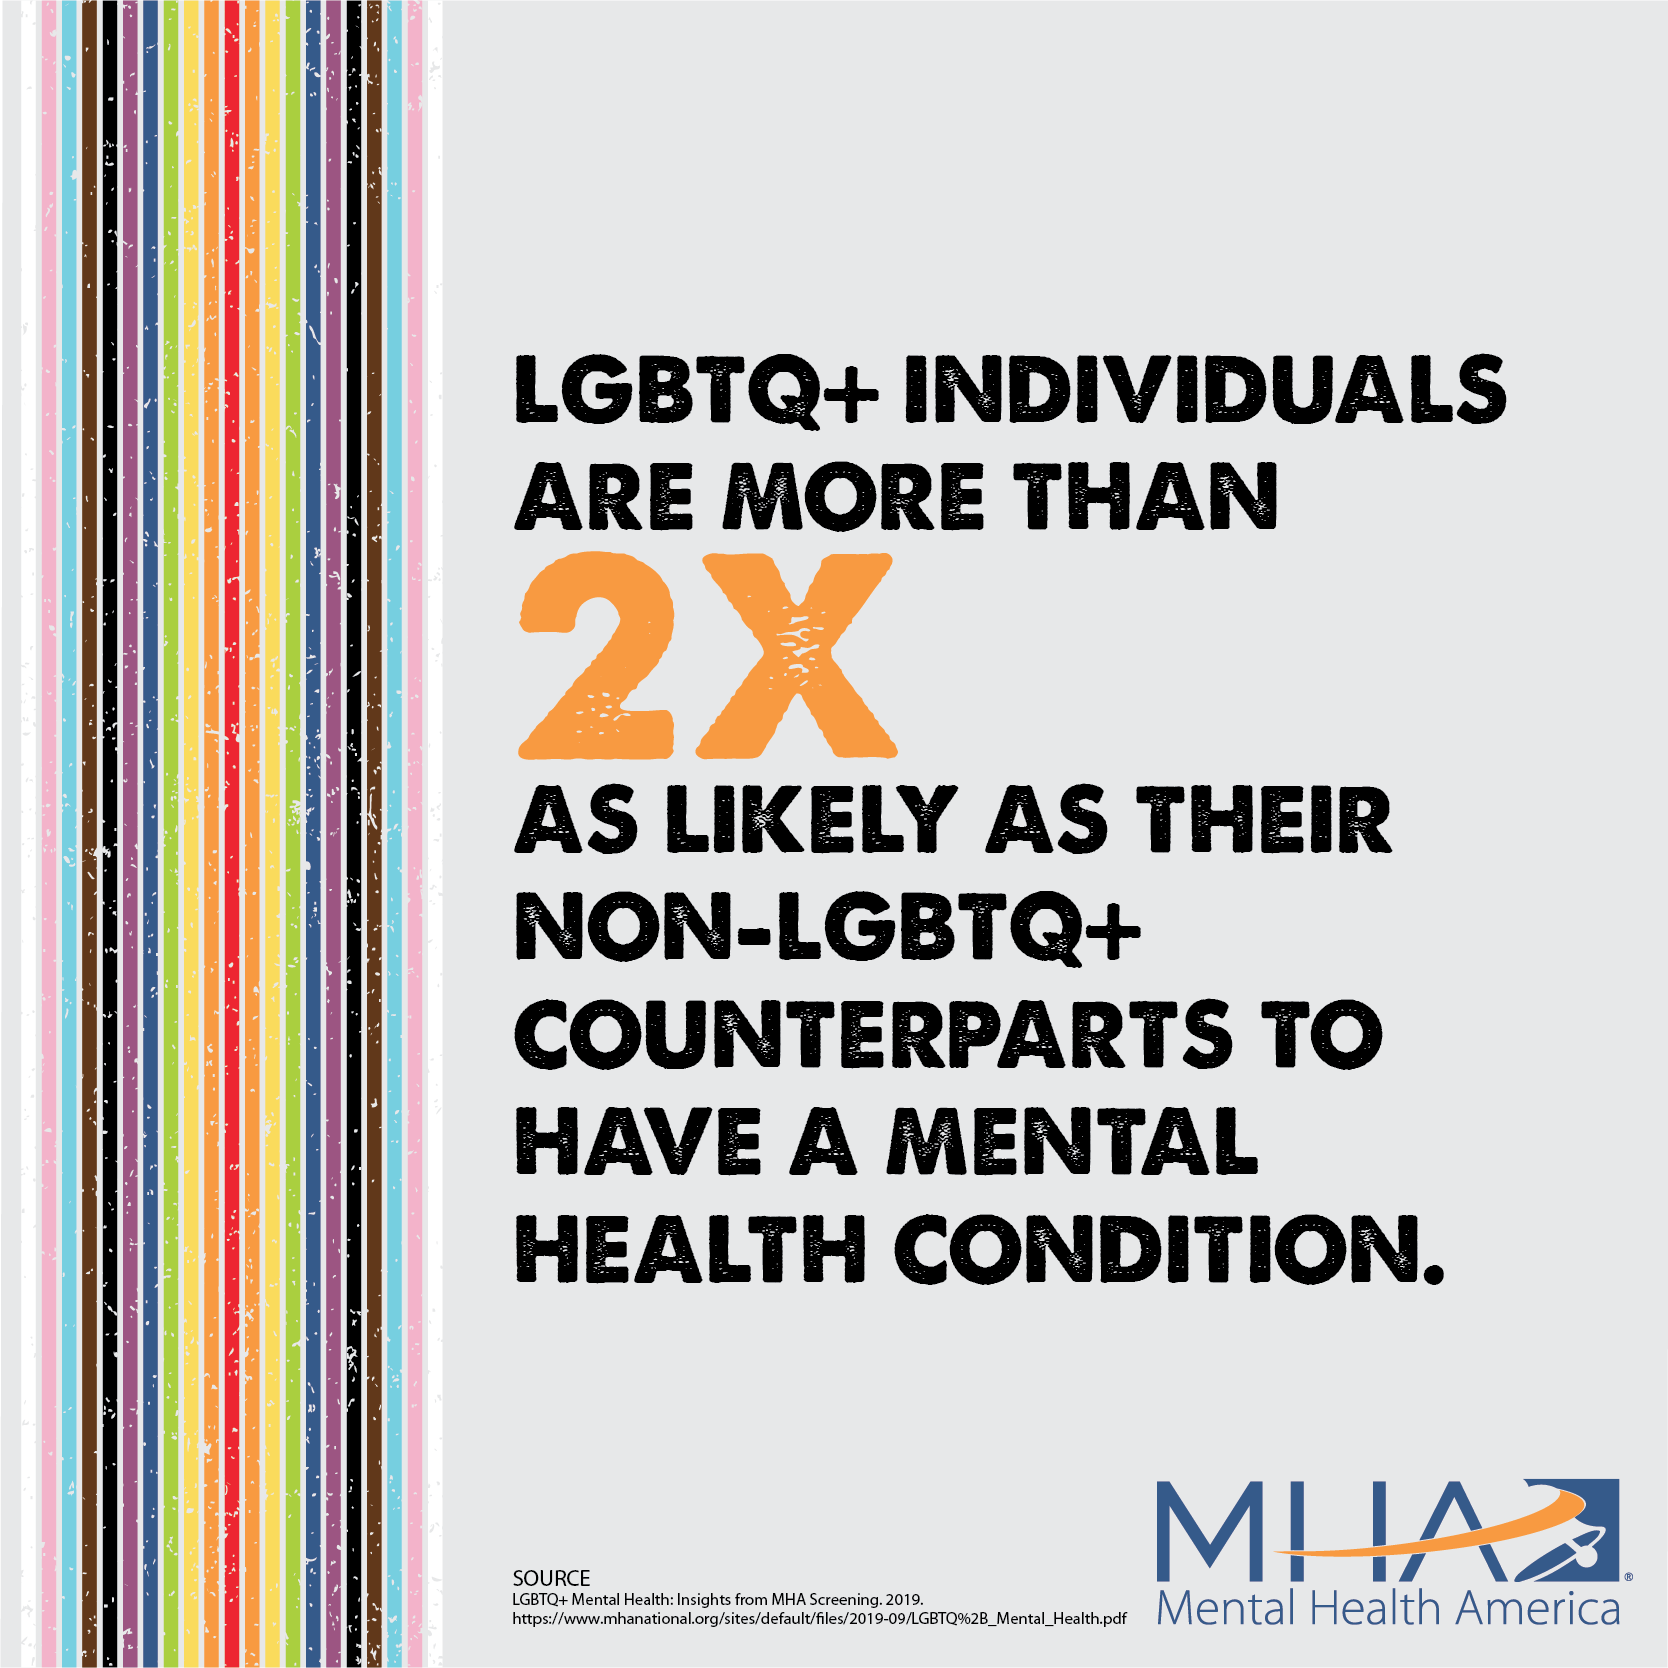 LGBTQ+ individuals are more than 2X as likely as their non-LGBTQ+ counterparts to have a mental health condition.